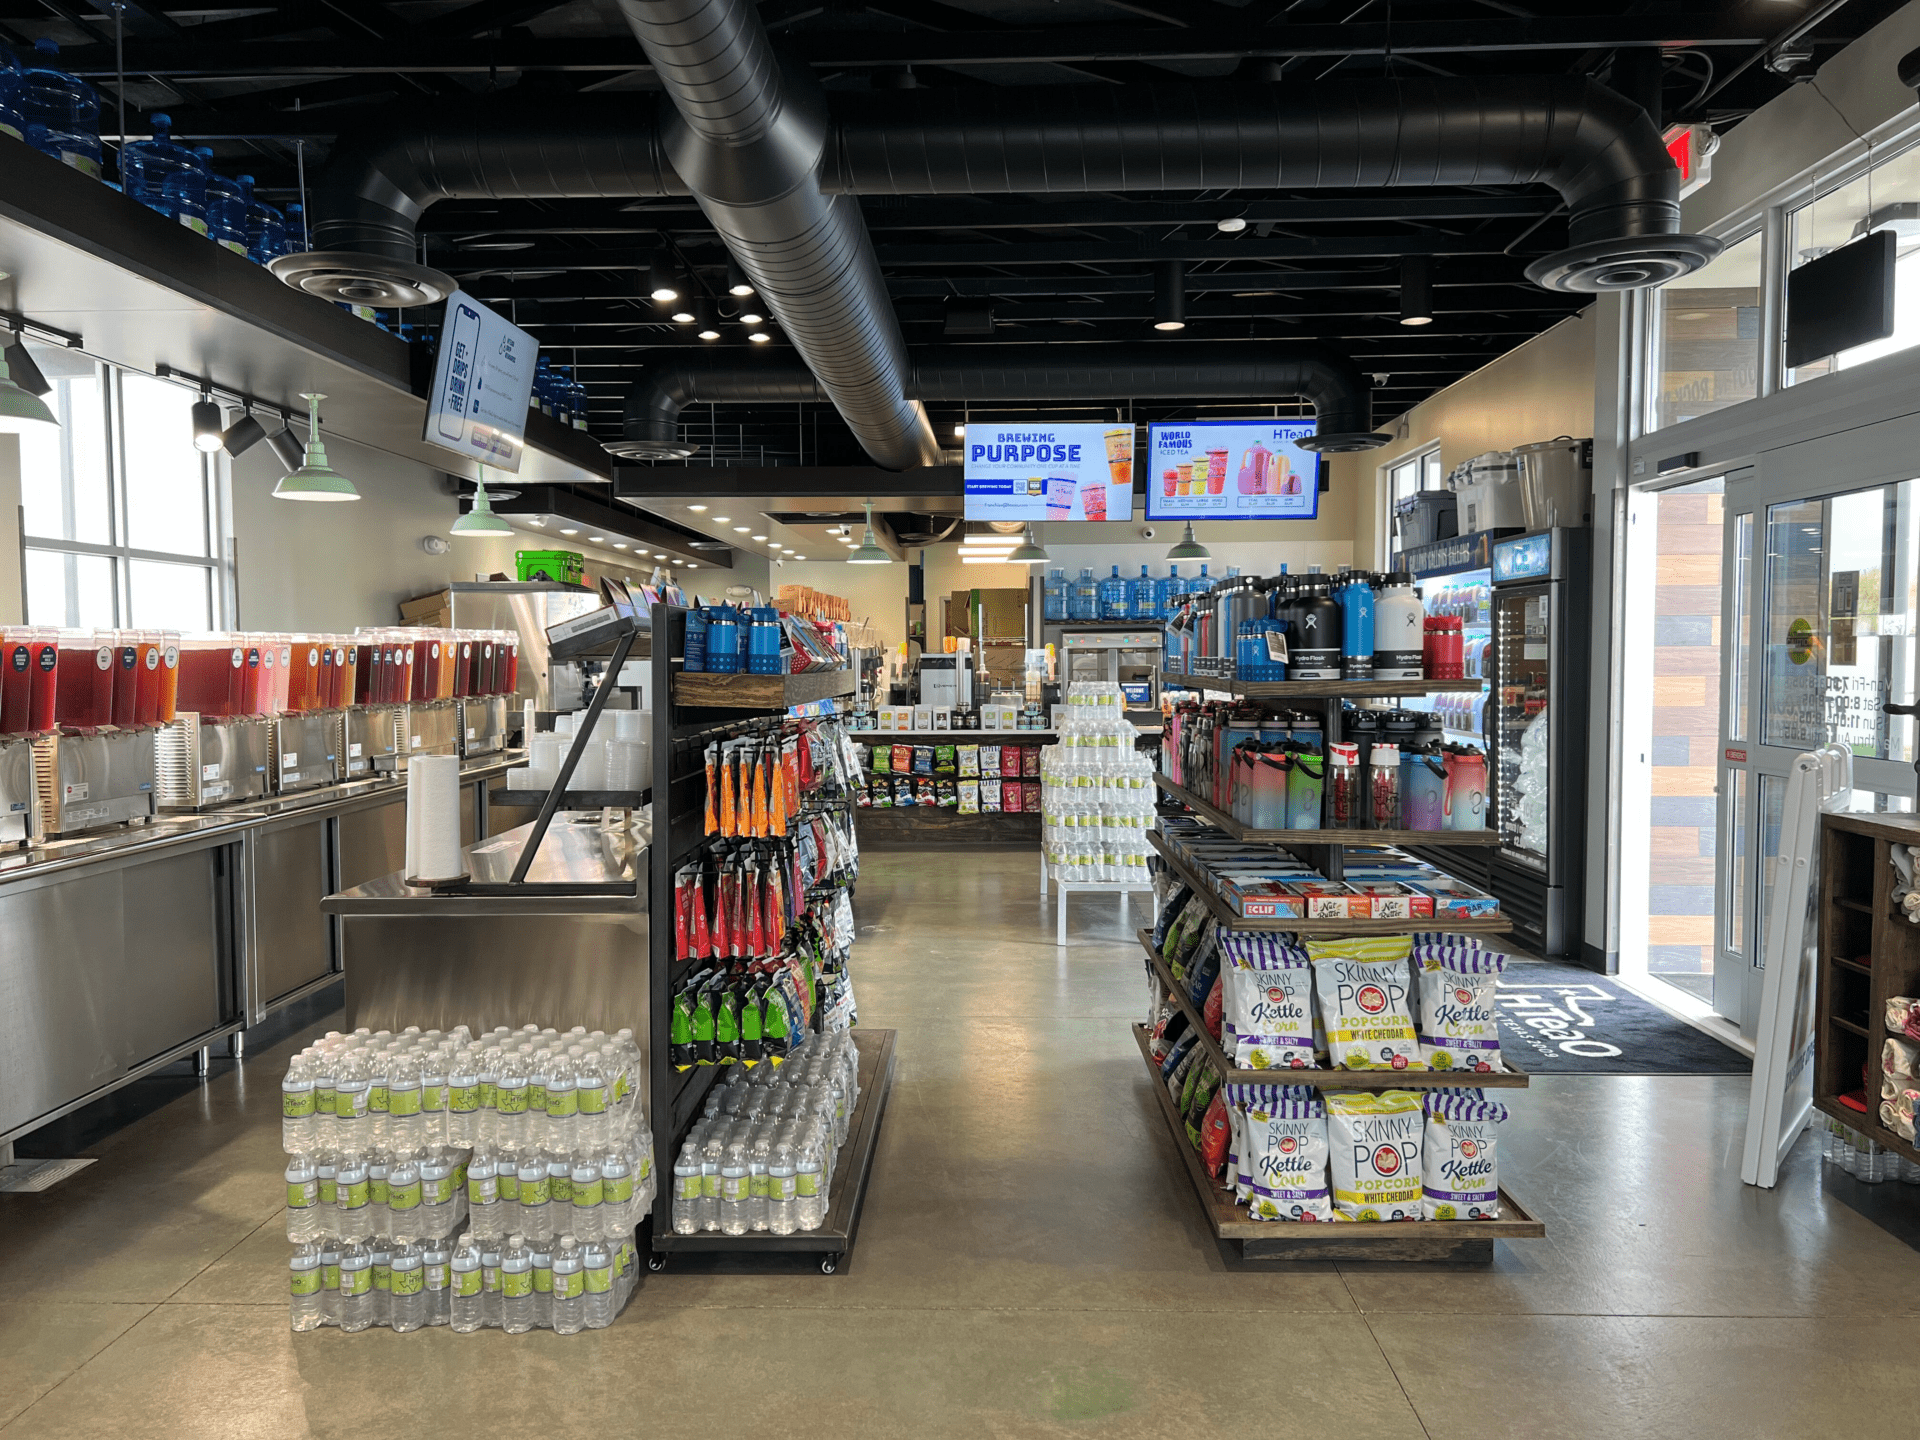 Retail store with shelves of various snacks and merchandise, and a row of containers filled with tea to the left